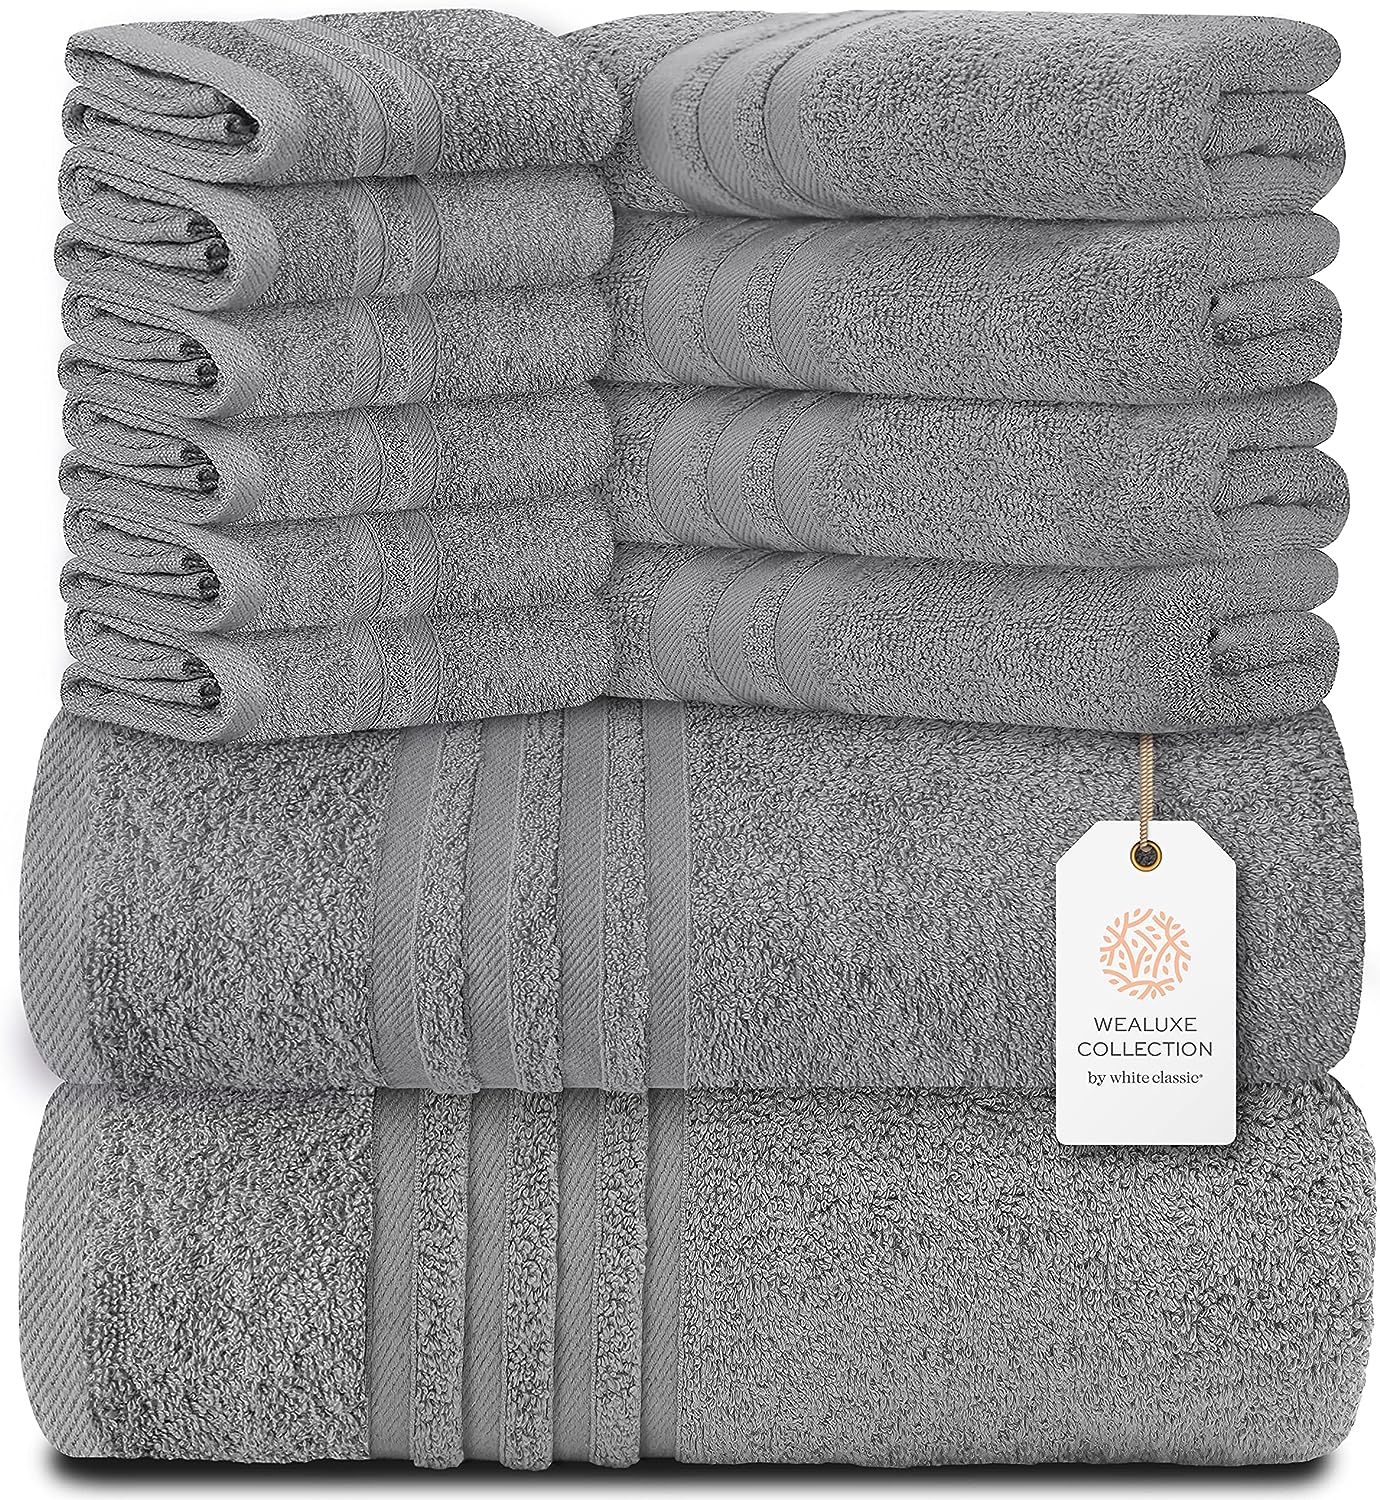 Welauxe Collection 8Pc Light Gray Towel Set